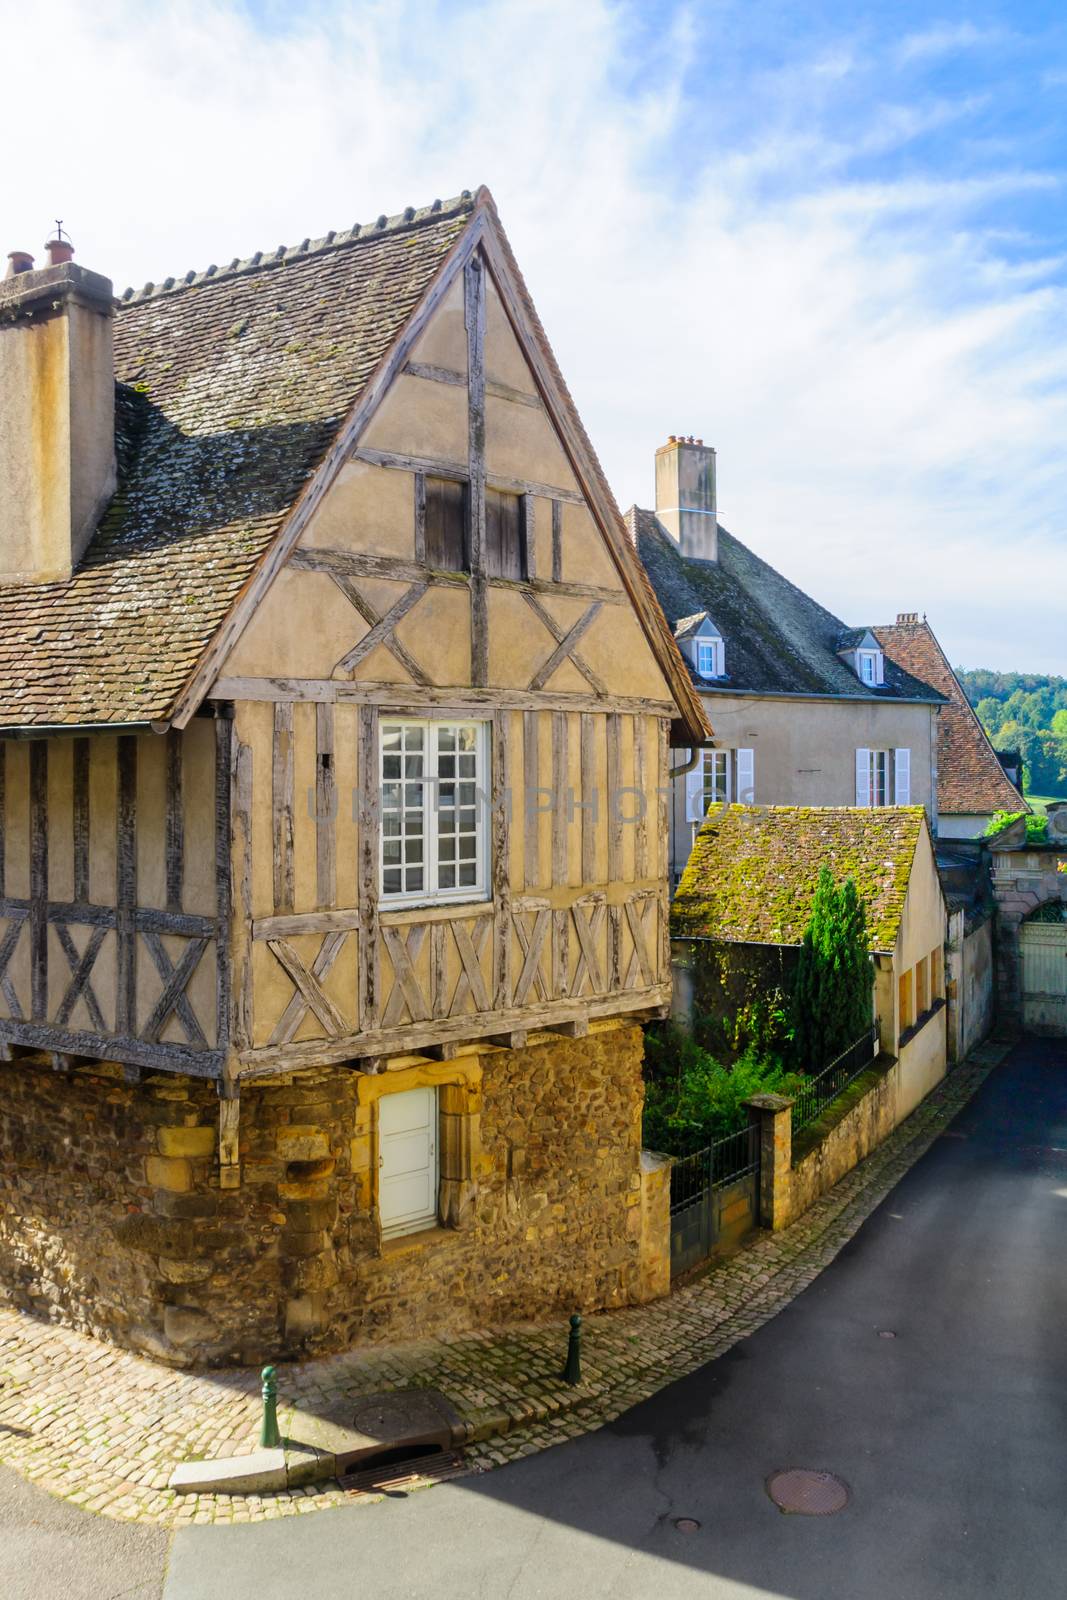 Typical half-timbered old building in Autun by RnDmS